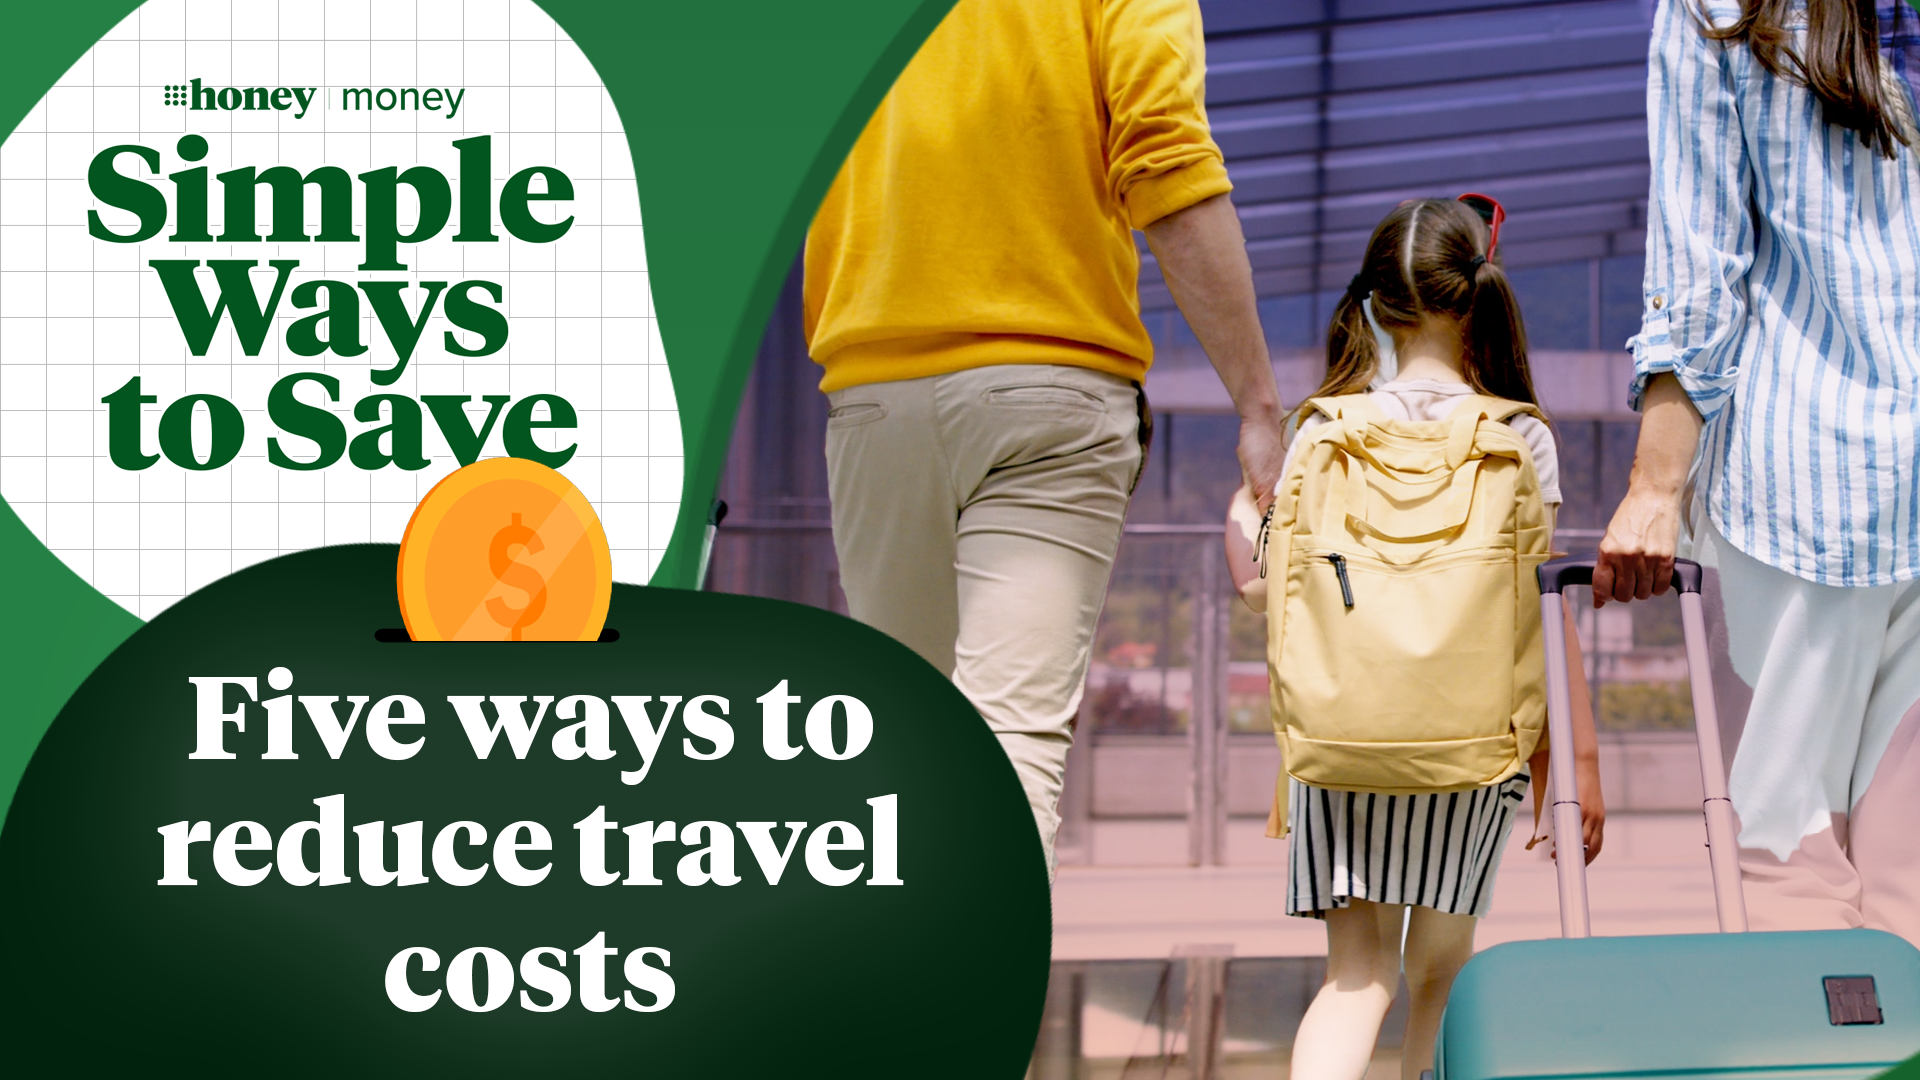 Simple Ways to Save: How to reduce travel costs